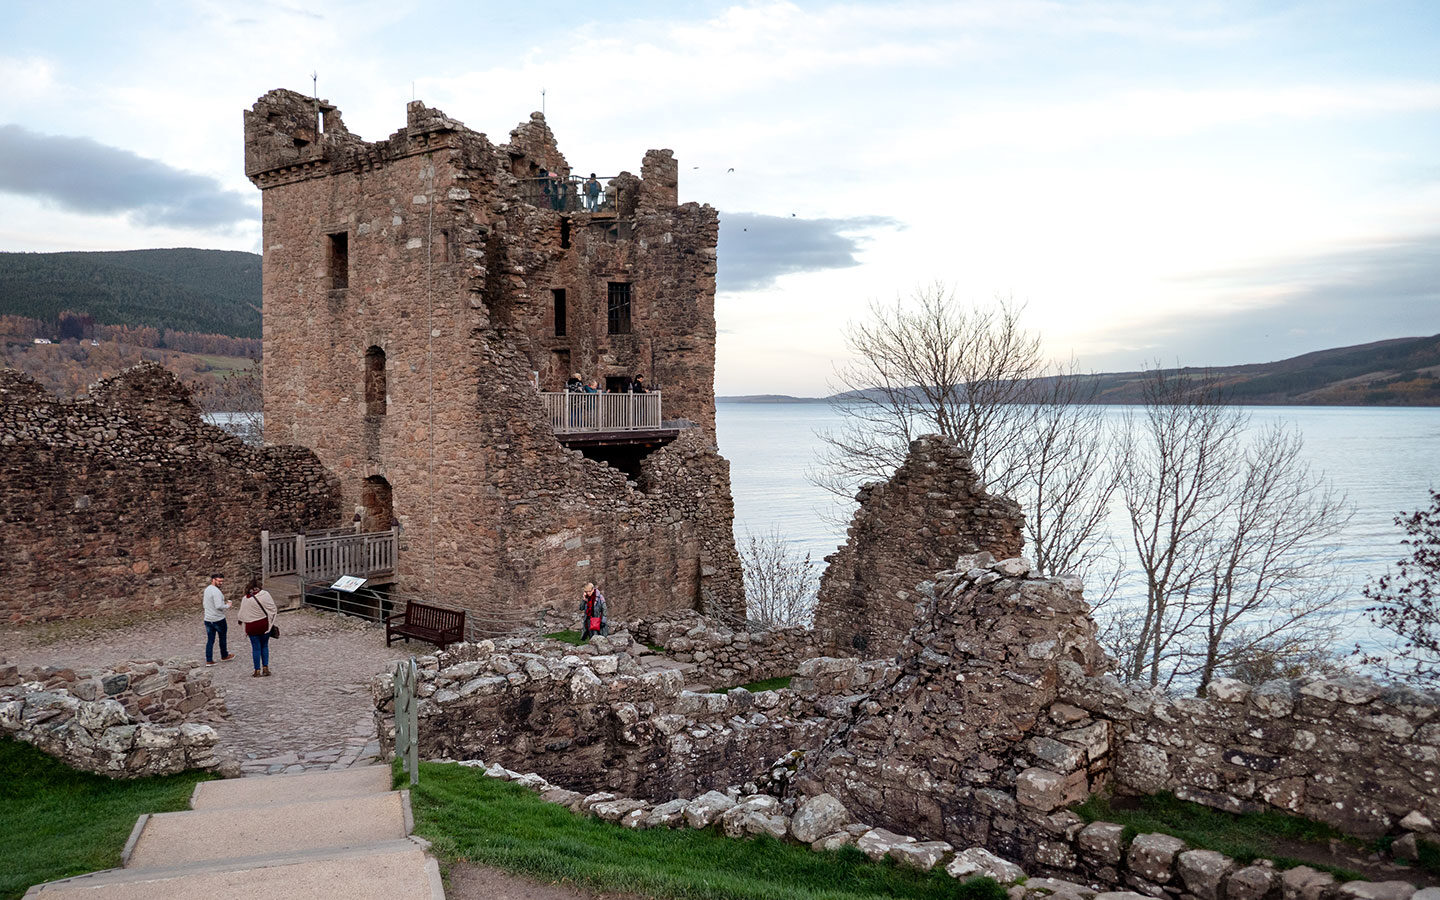 The Grant Tower at Urquhart Castle, one of the top things to do in Loch Ness